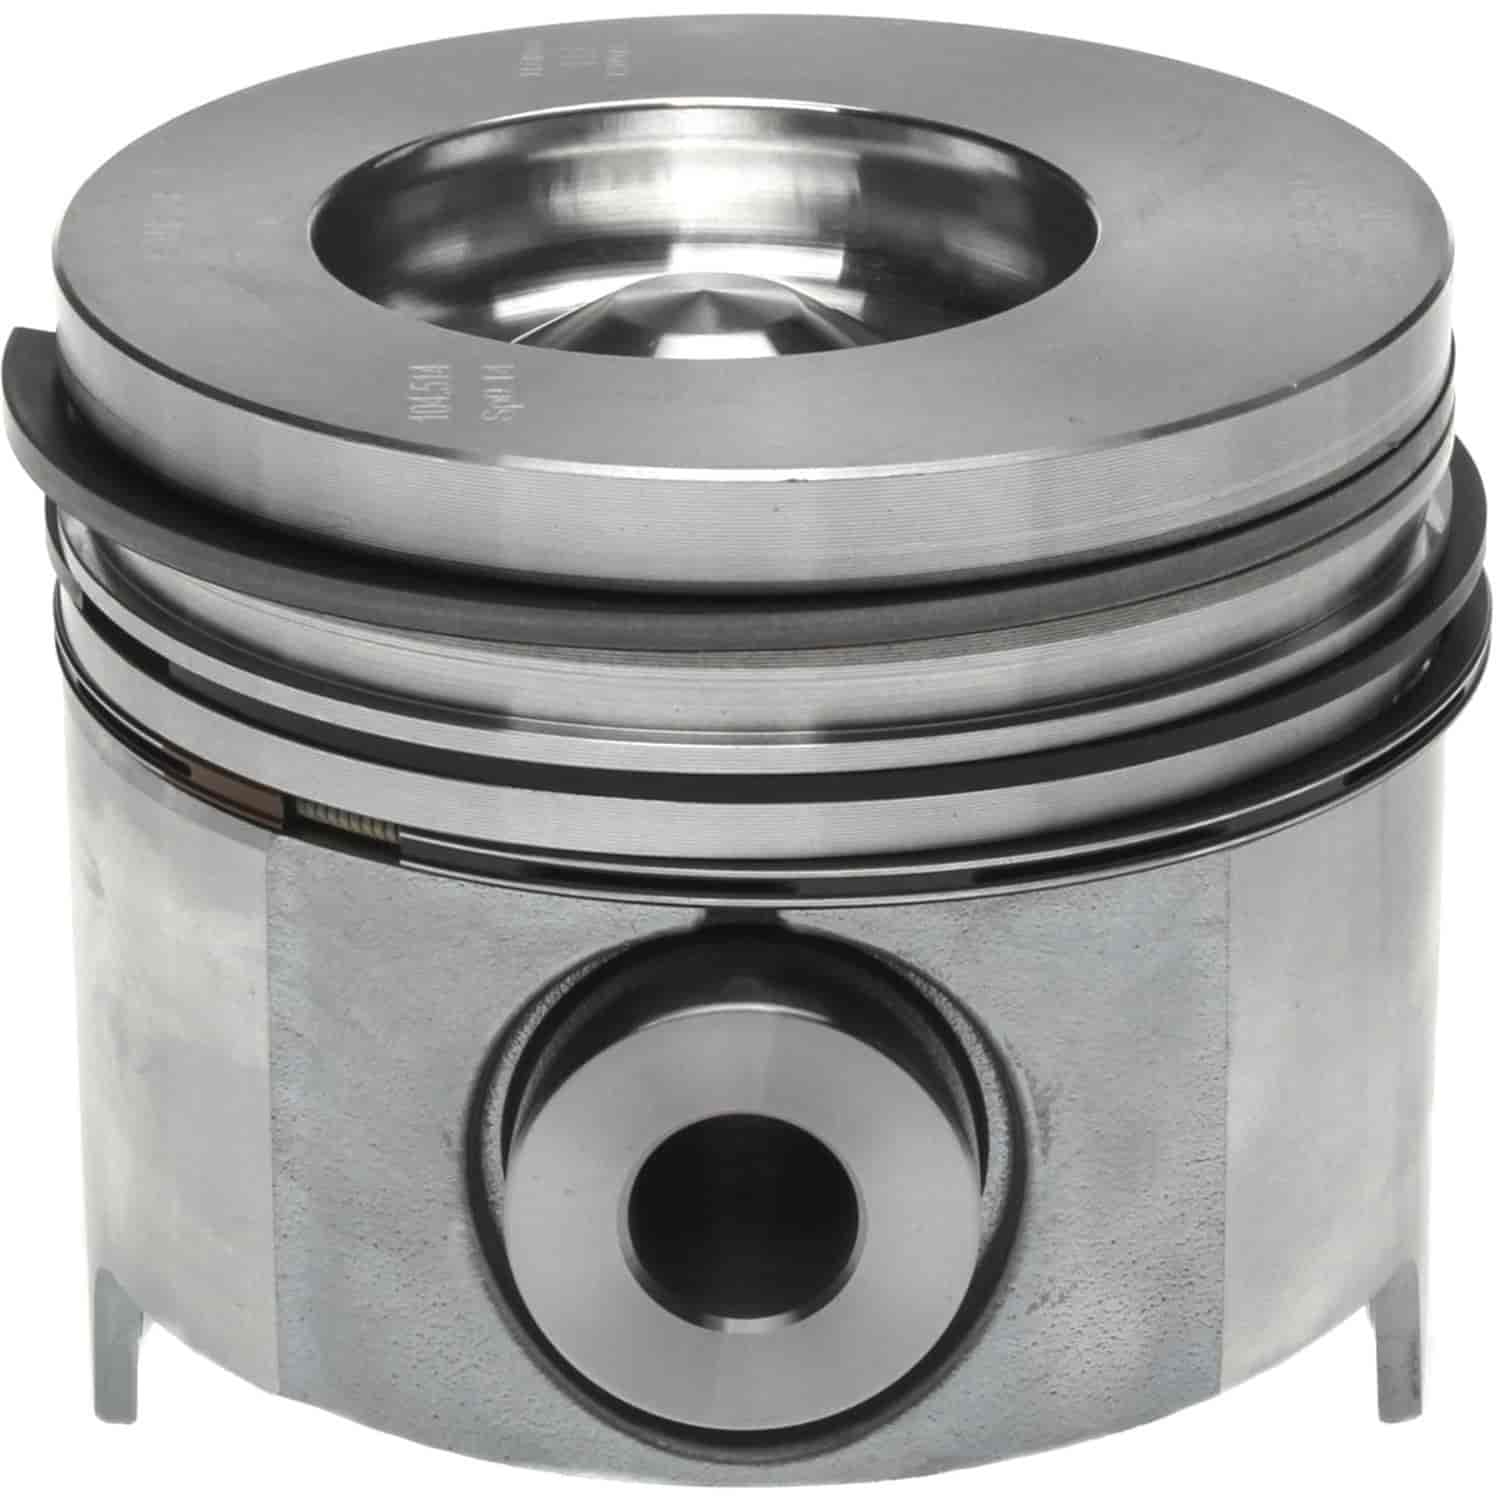 Piston Set With Rings 2001-2005 Chevy/GMC Duramax Diesel V8 6.6L Left Bank with 4.065" Bore (+.010")